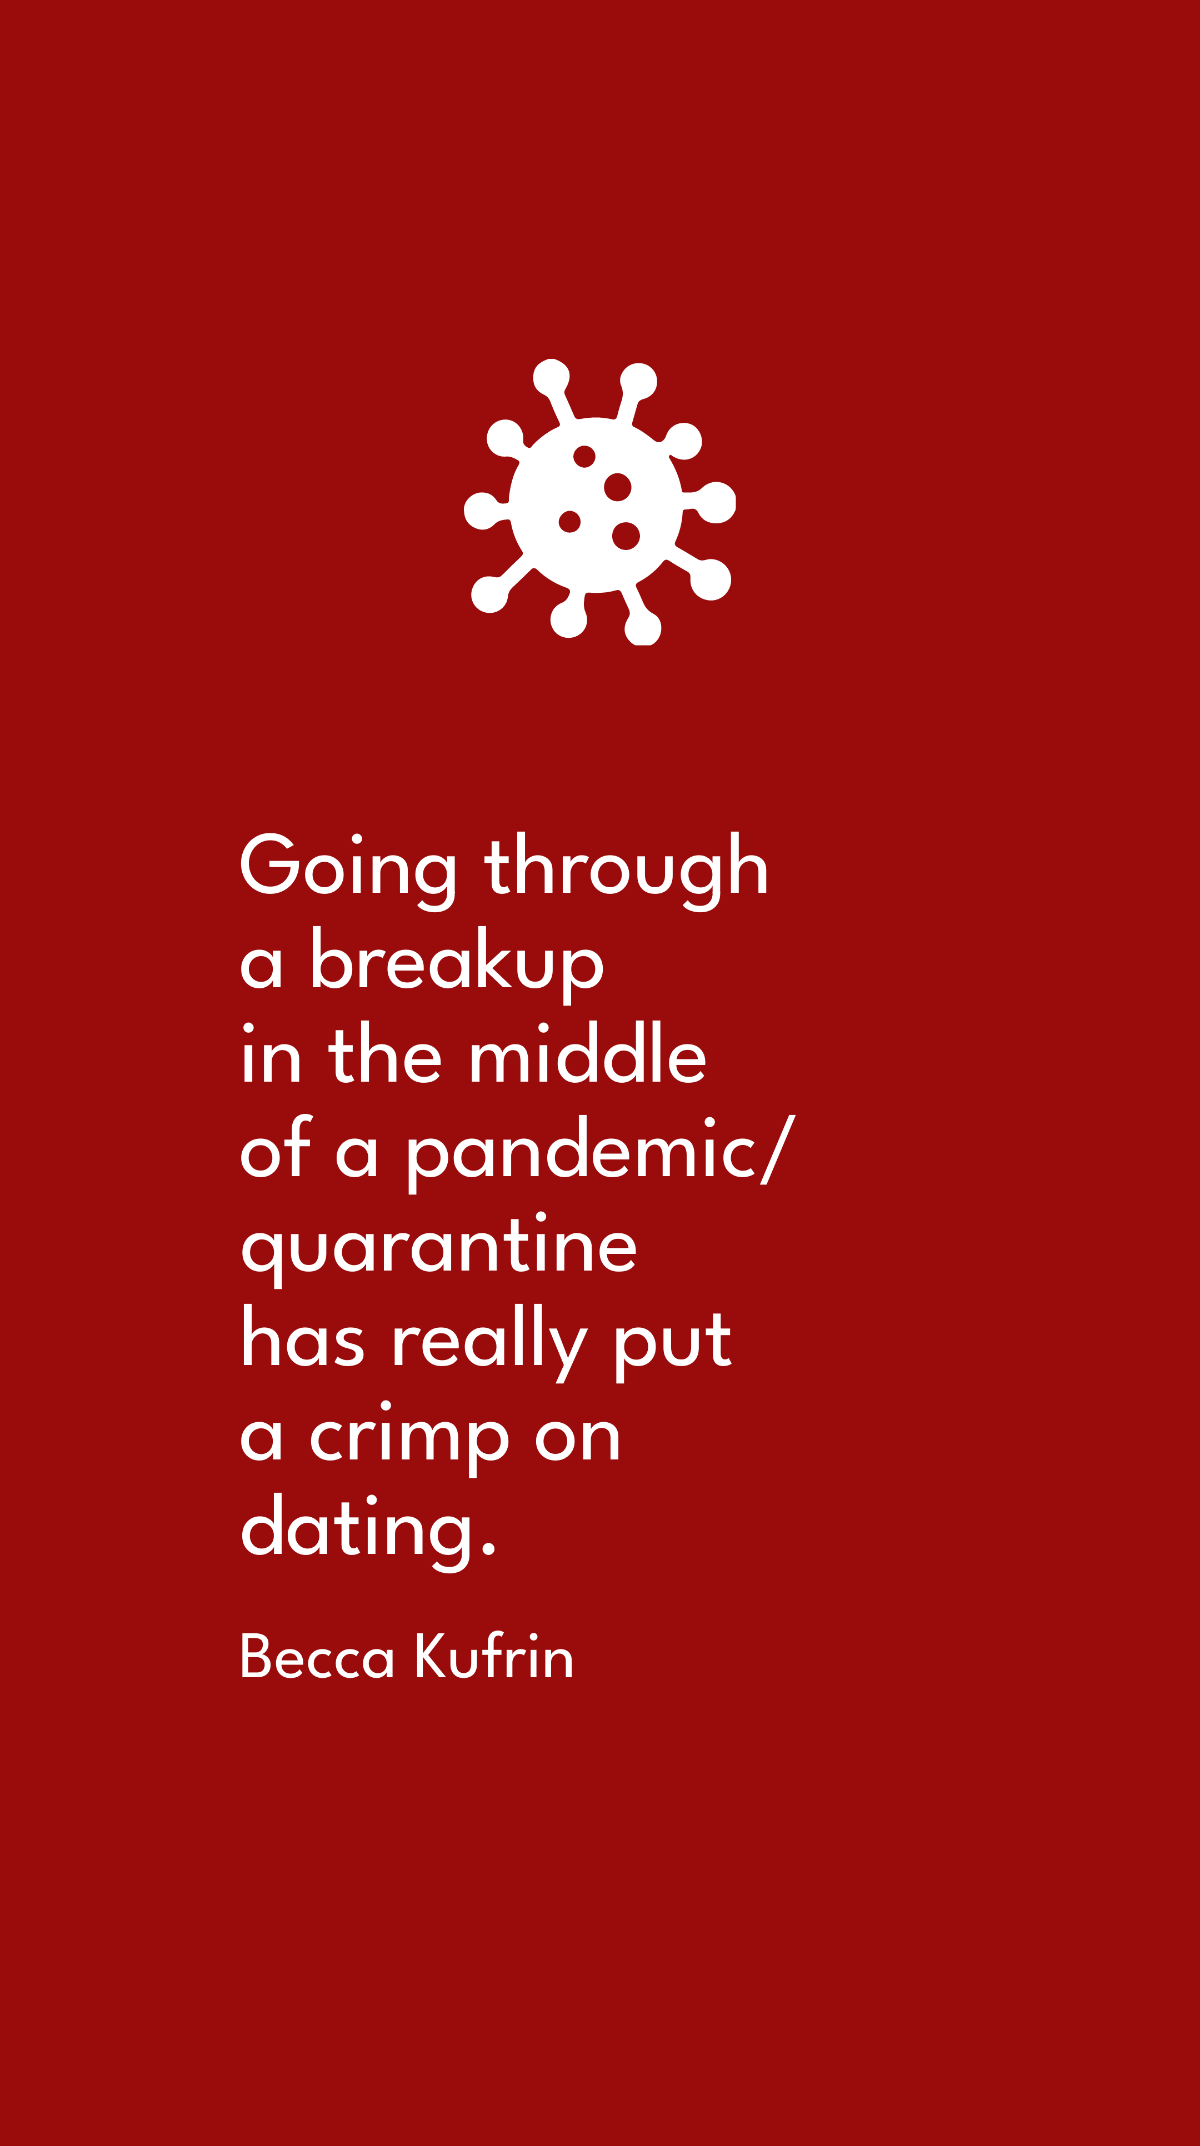 Becca Kufrin - Going through a breakup in the middle of a pandemic/quarantine has really put a crimp on dating. Template